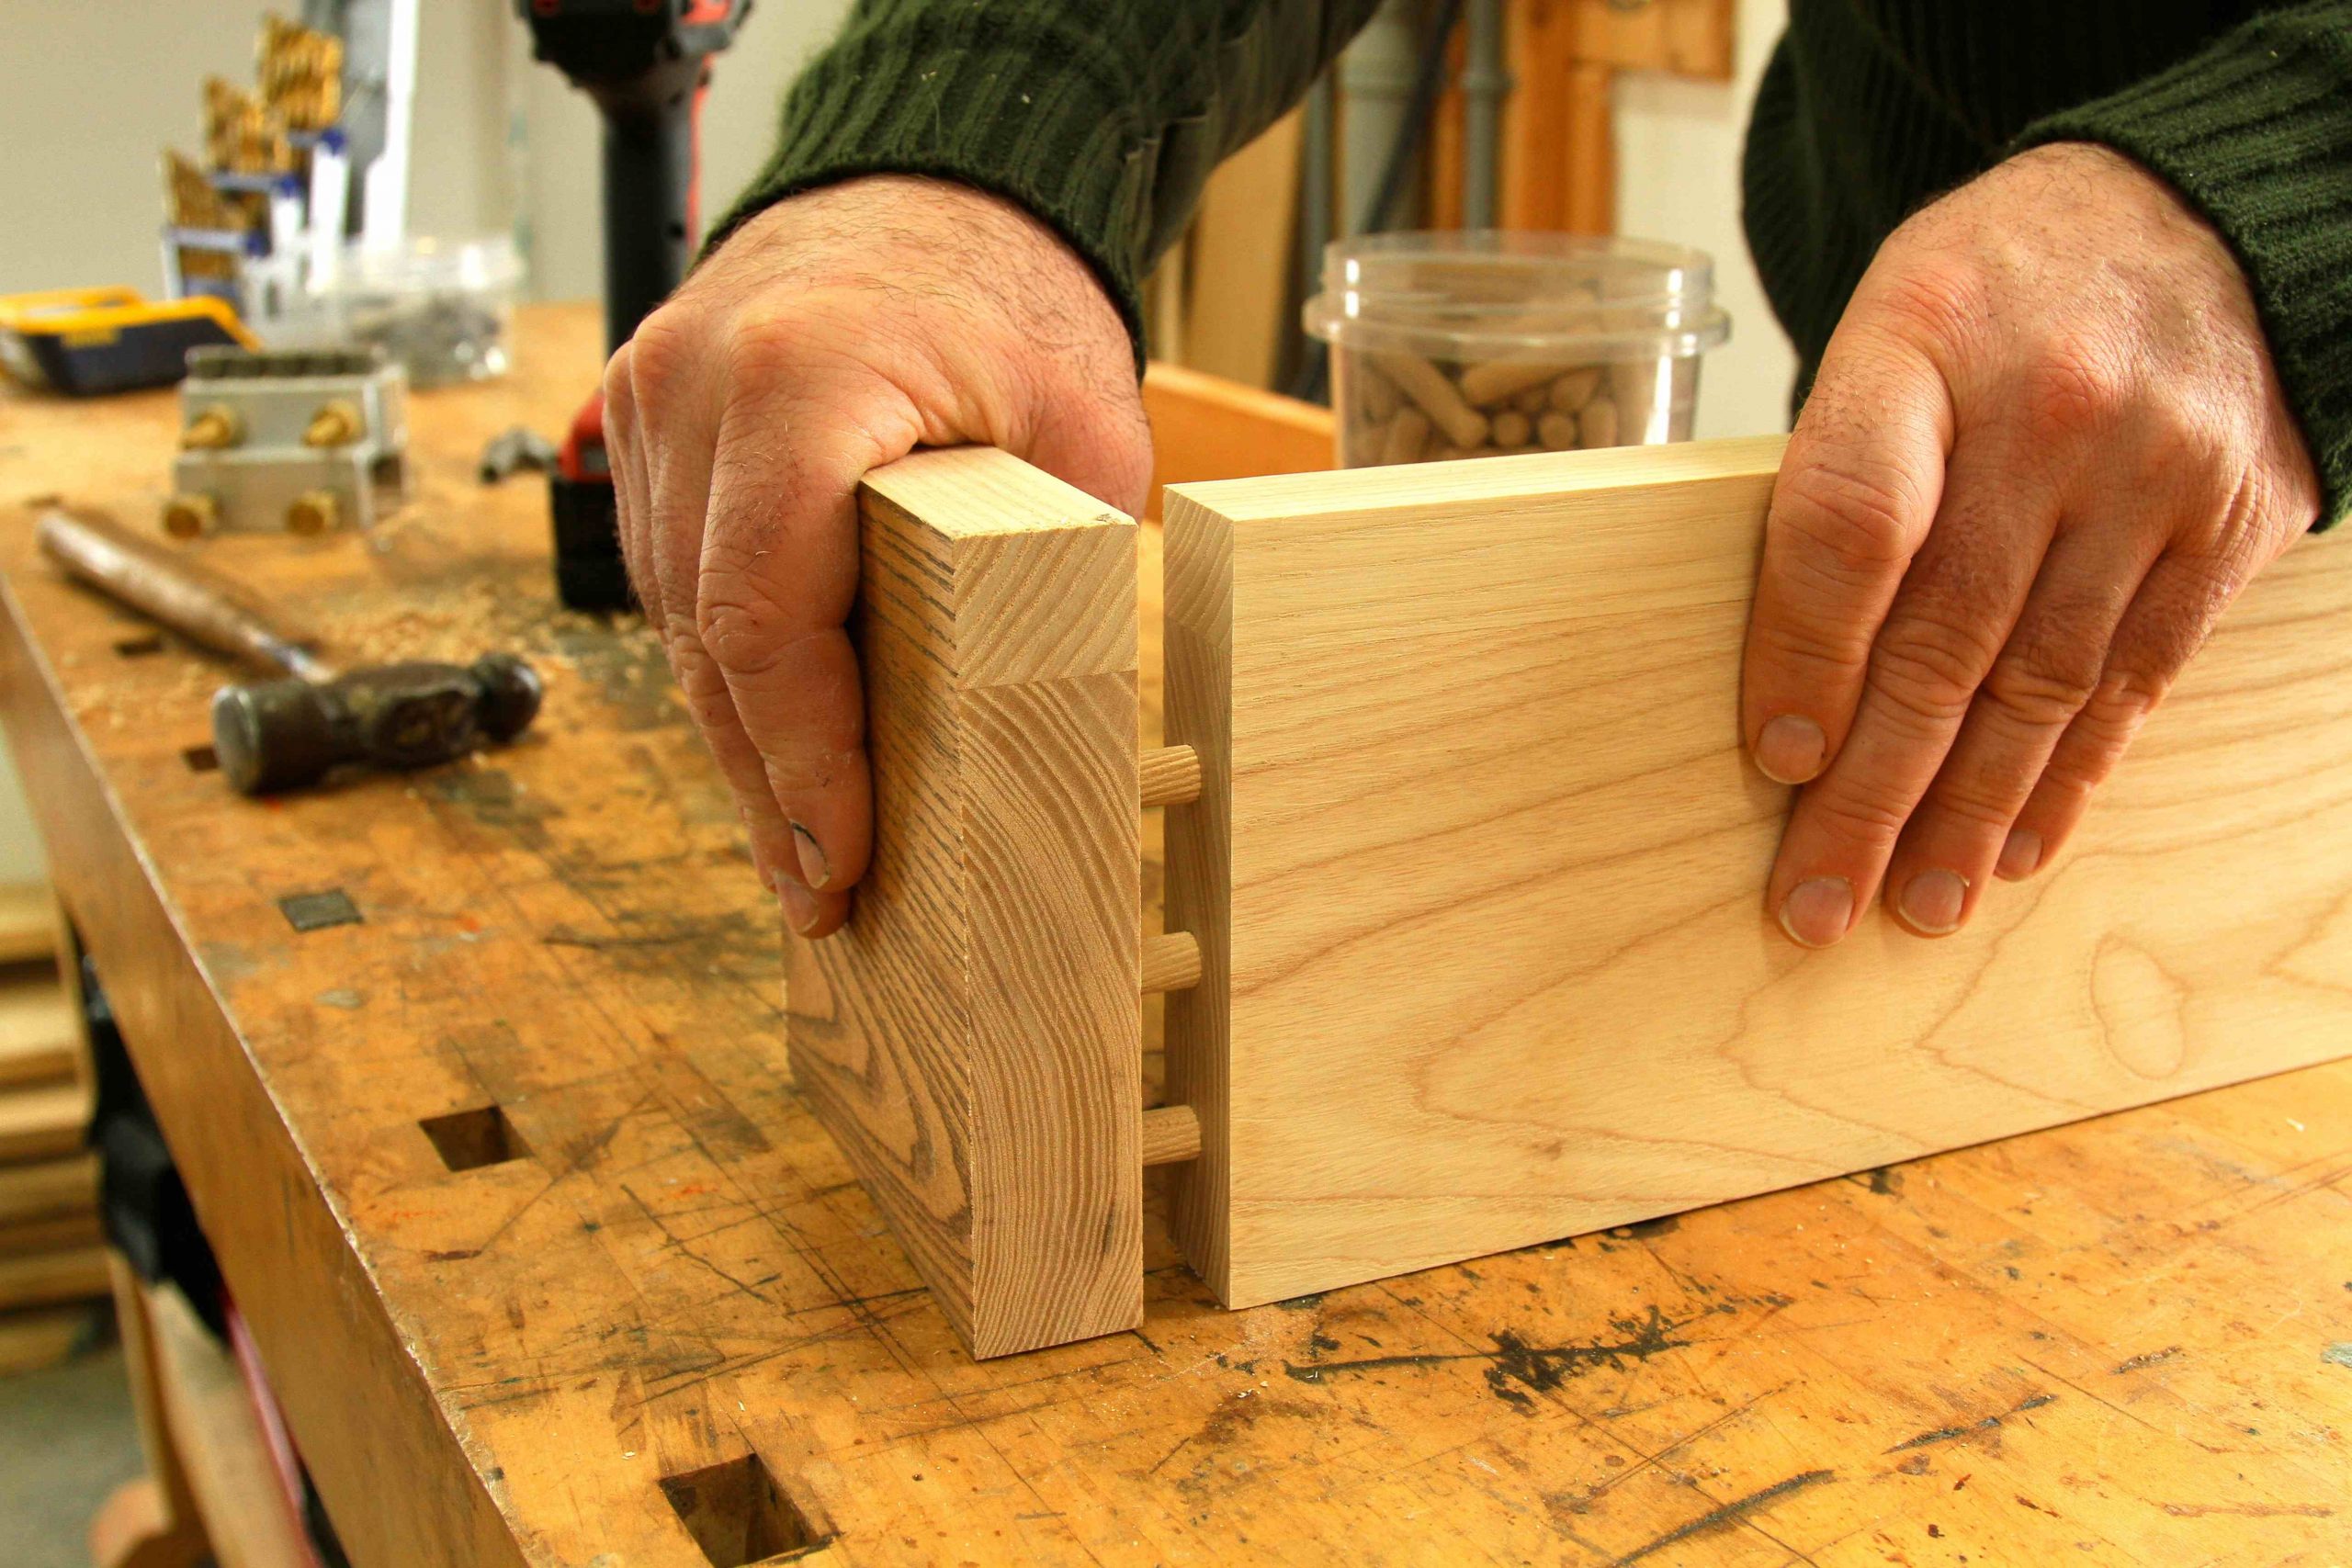 How To Make Perfect Edge Joints with a Wood Router